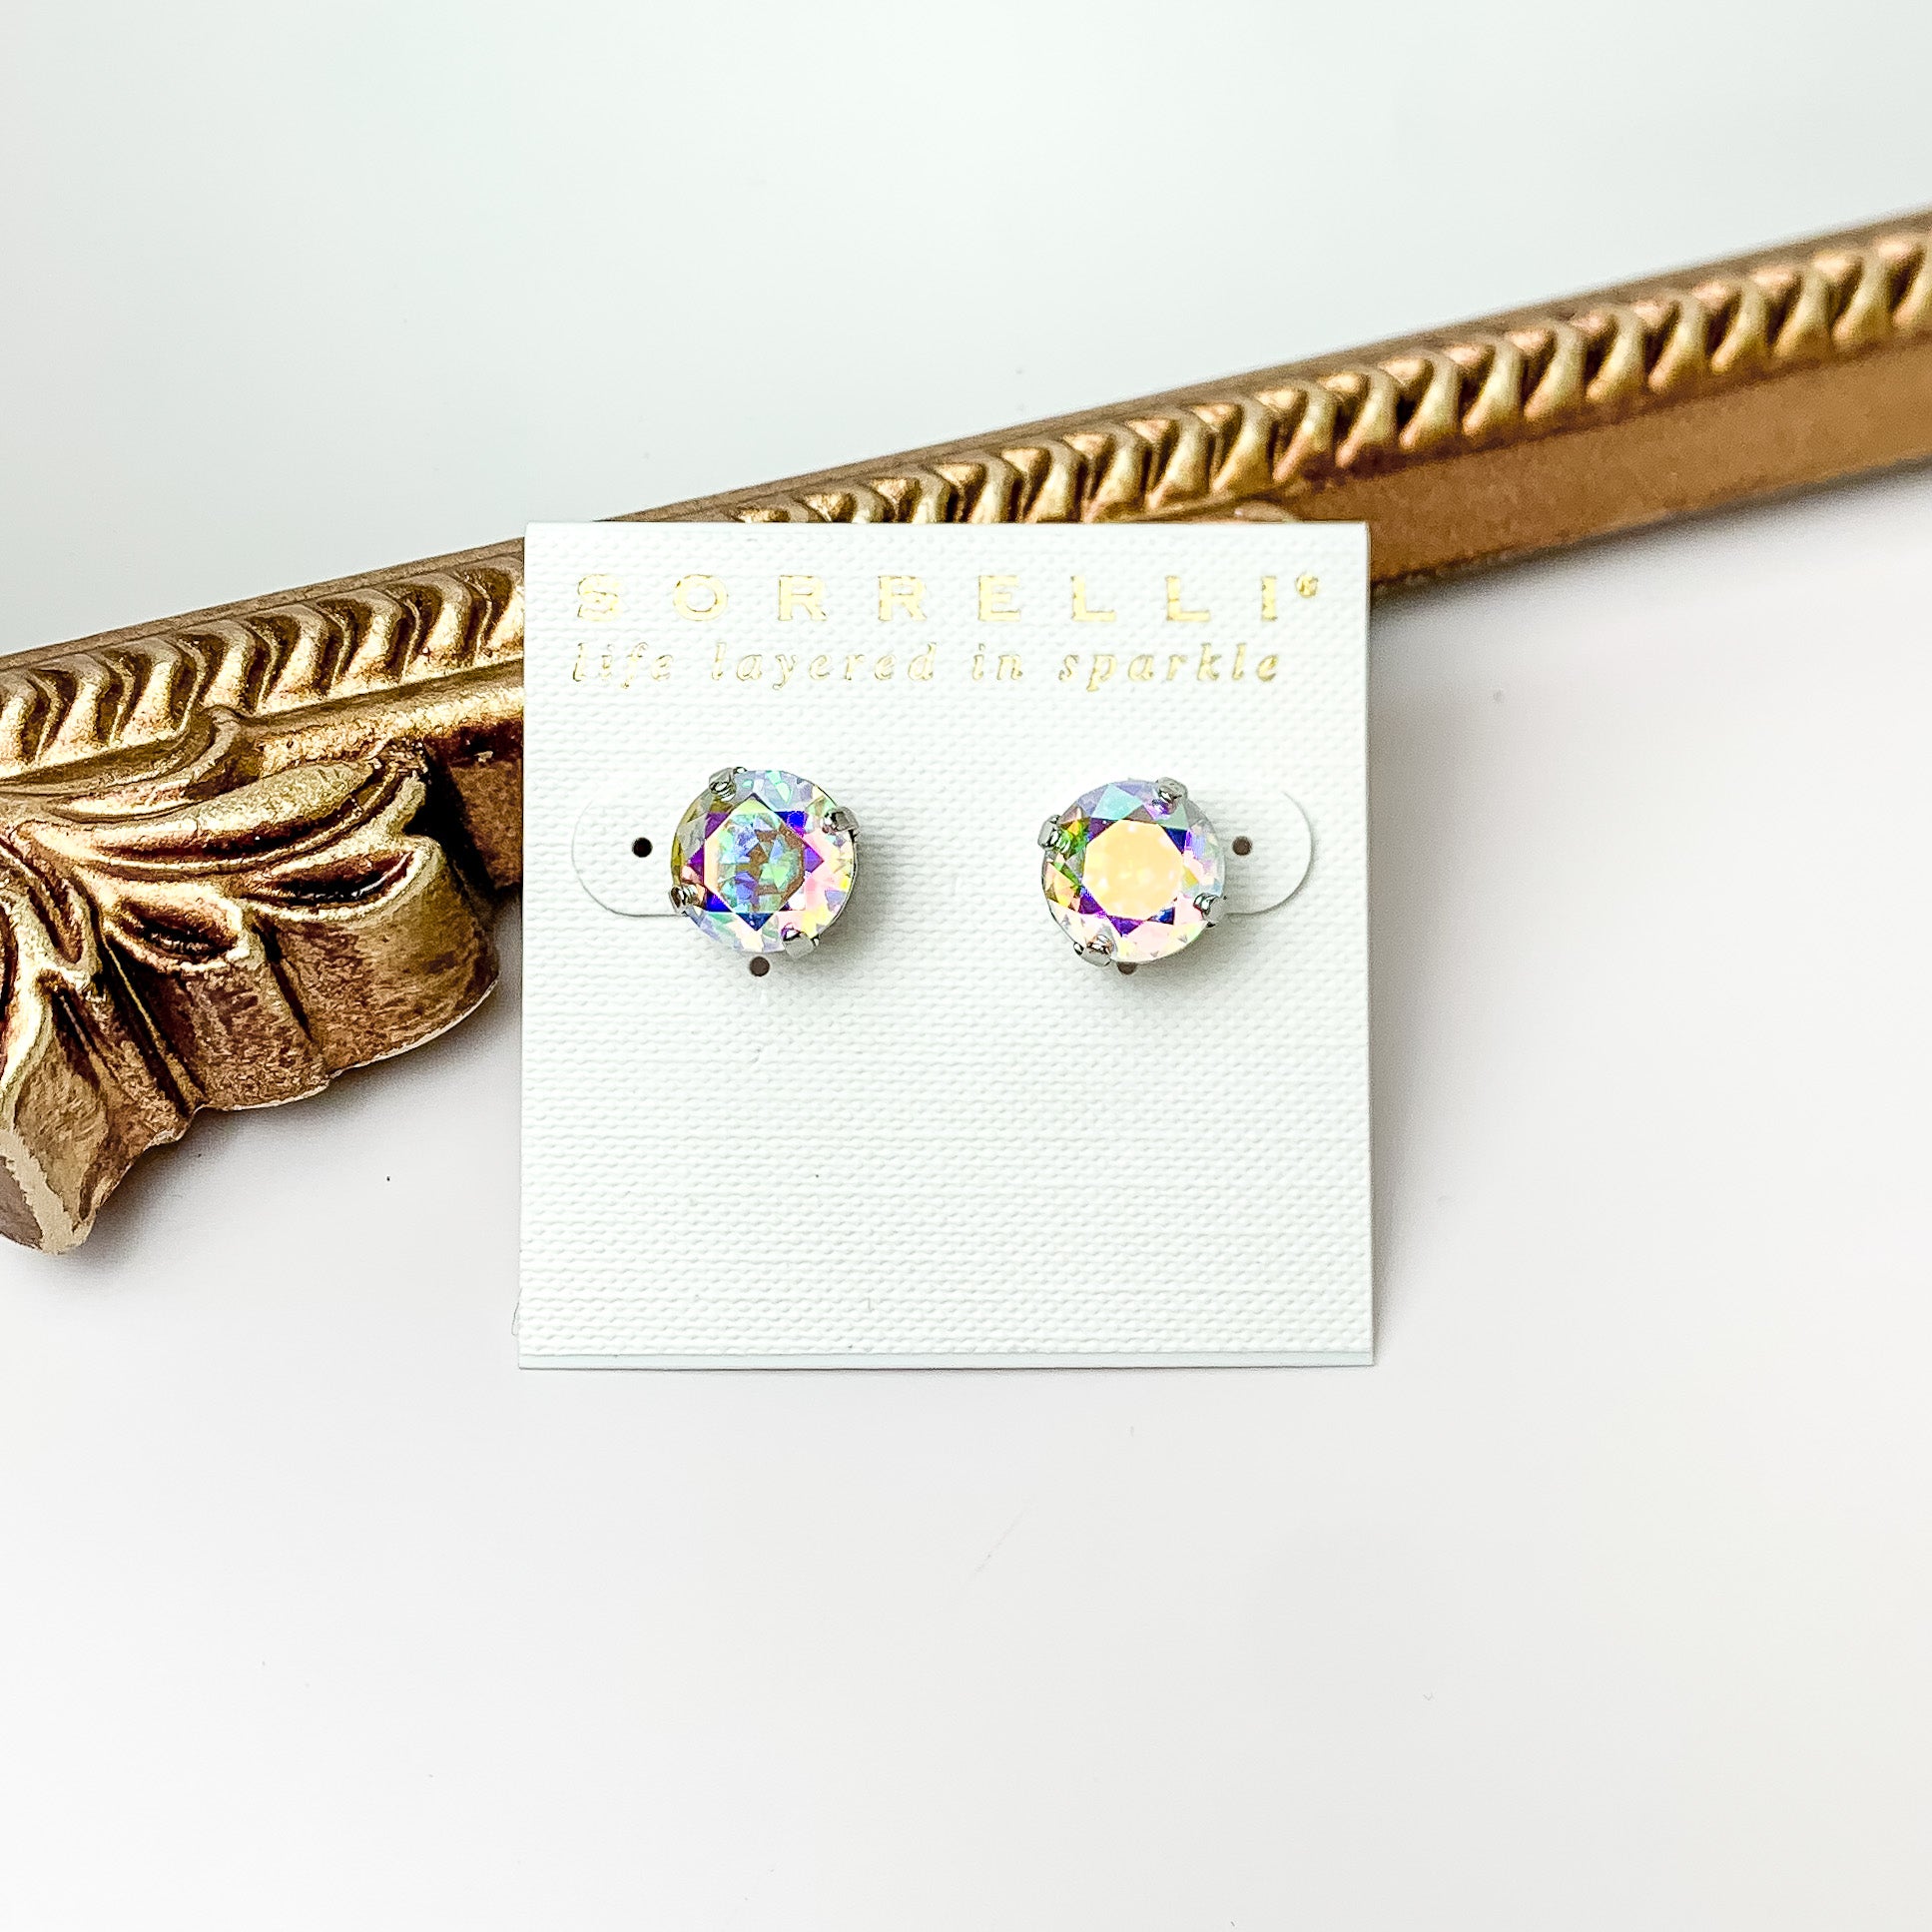 Pictured are round, ab crystal stud earrings with a silver backing. These earrings are pictured in front of a gold mirror on a white background.